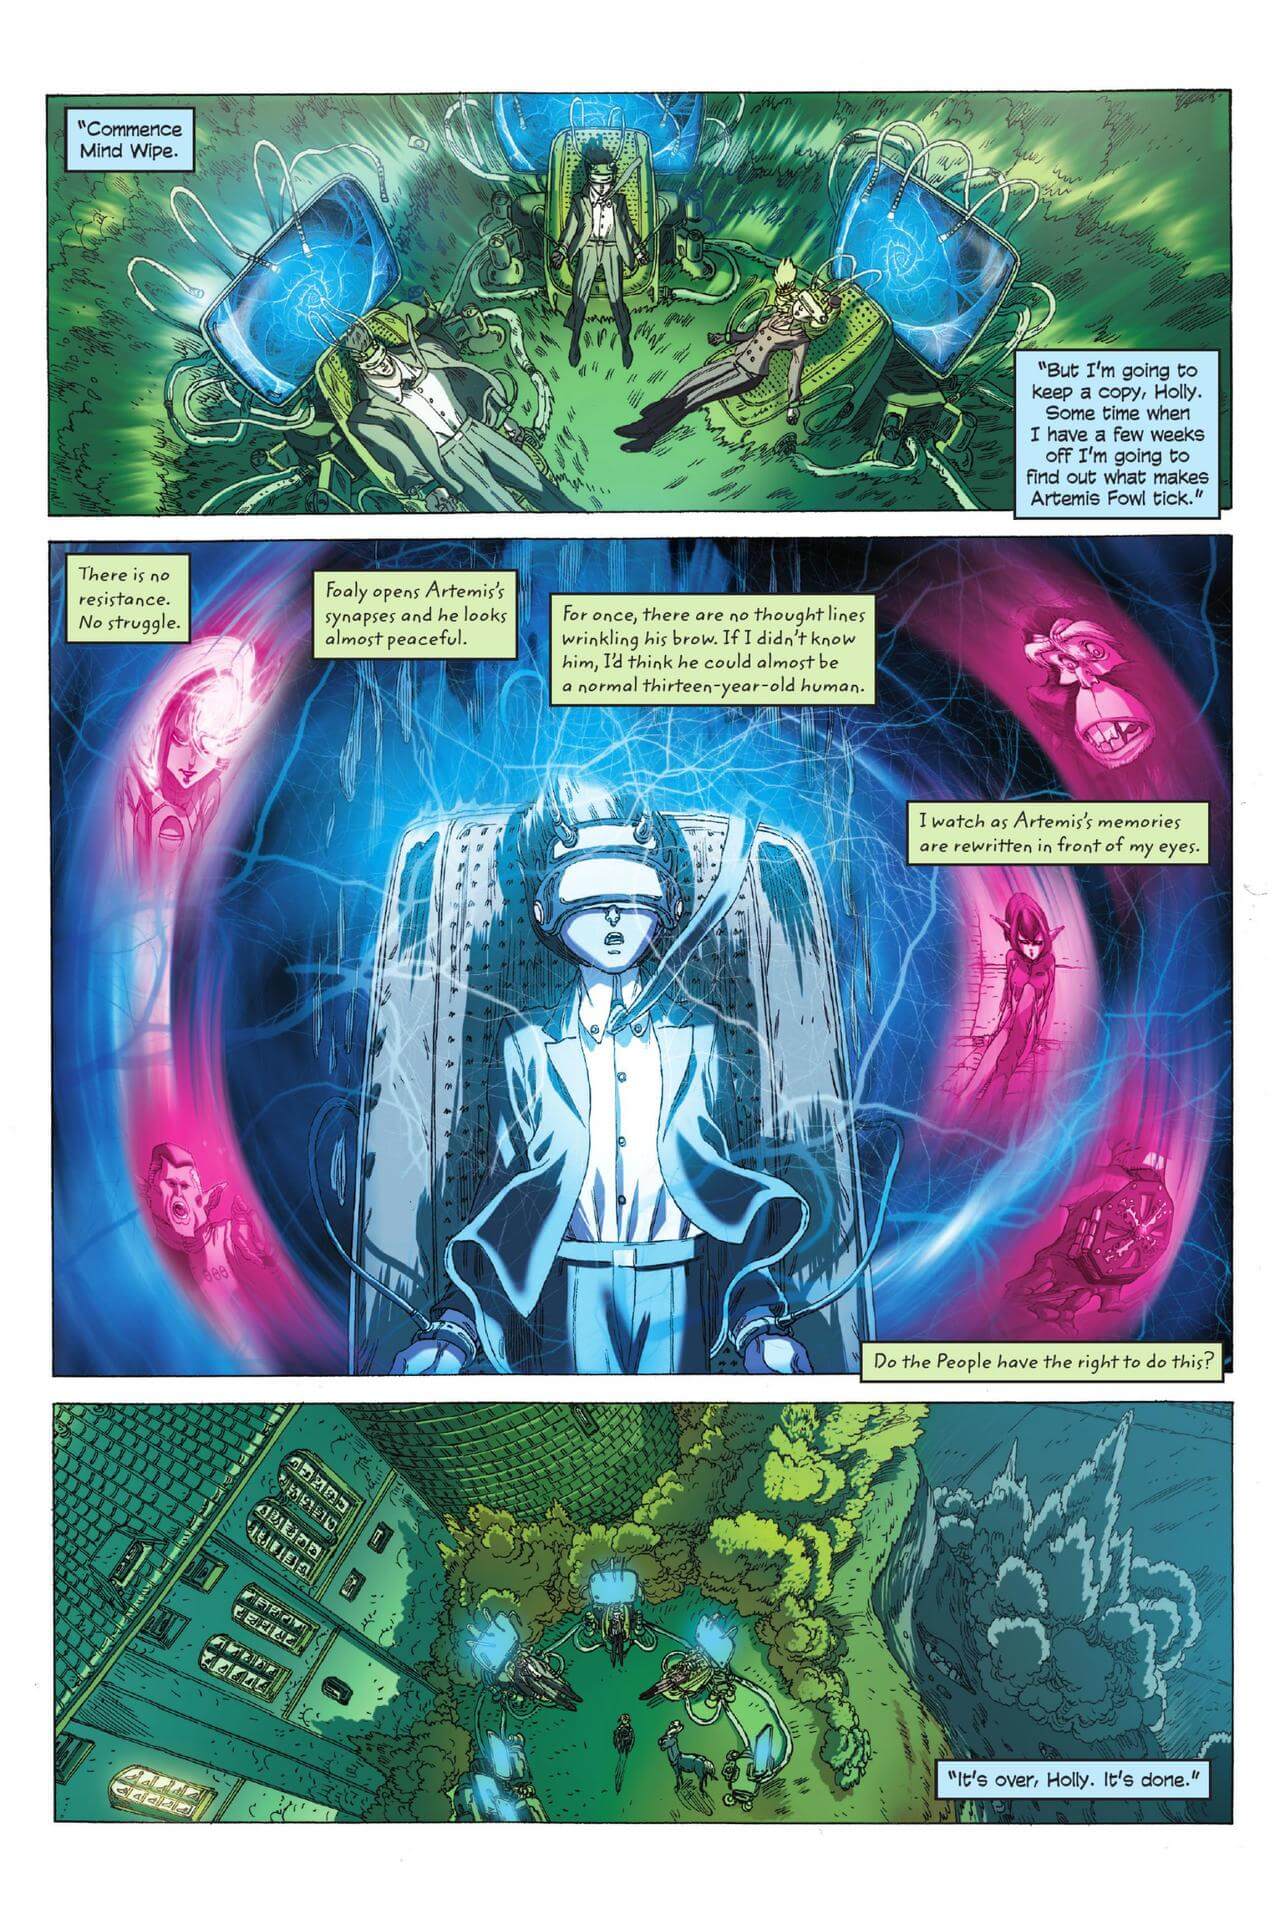 page 106 of artemis fowl eternity code graphic novel